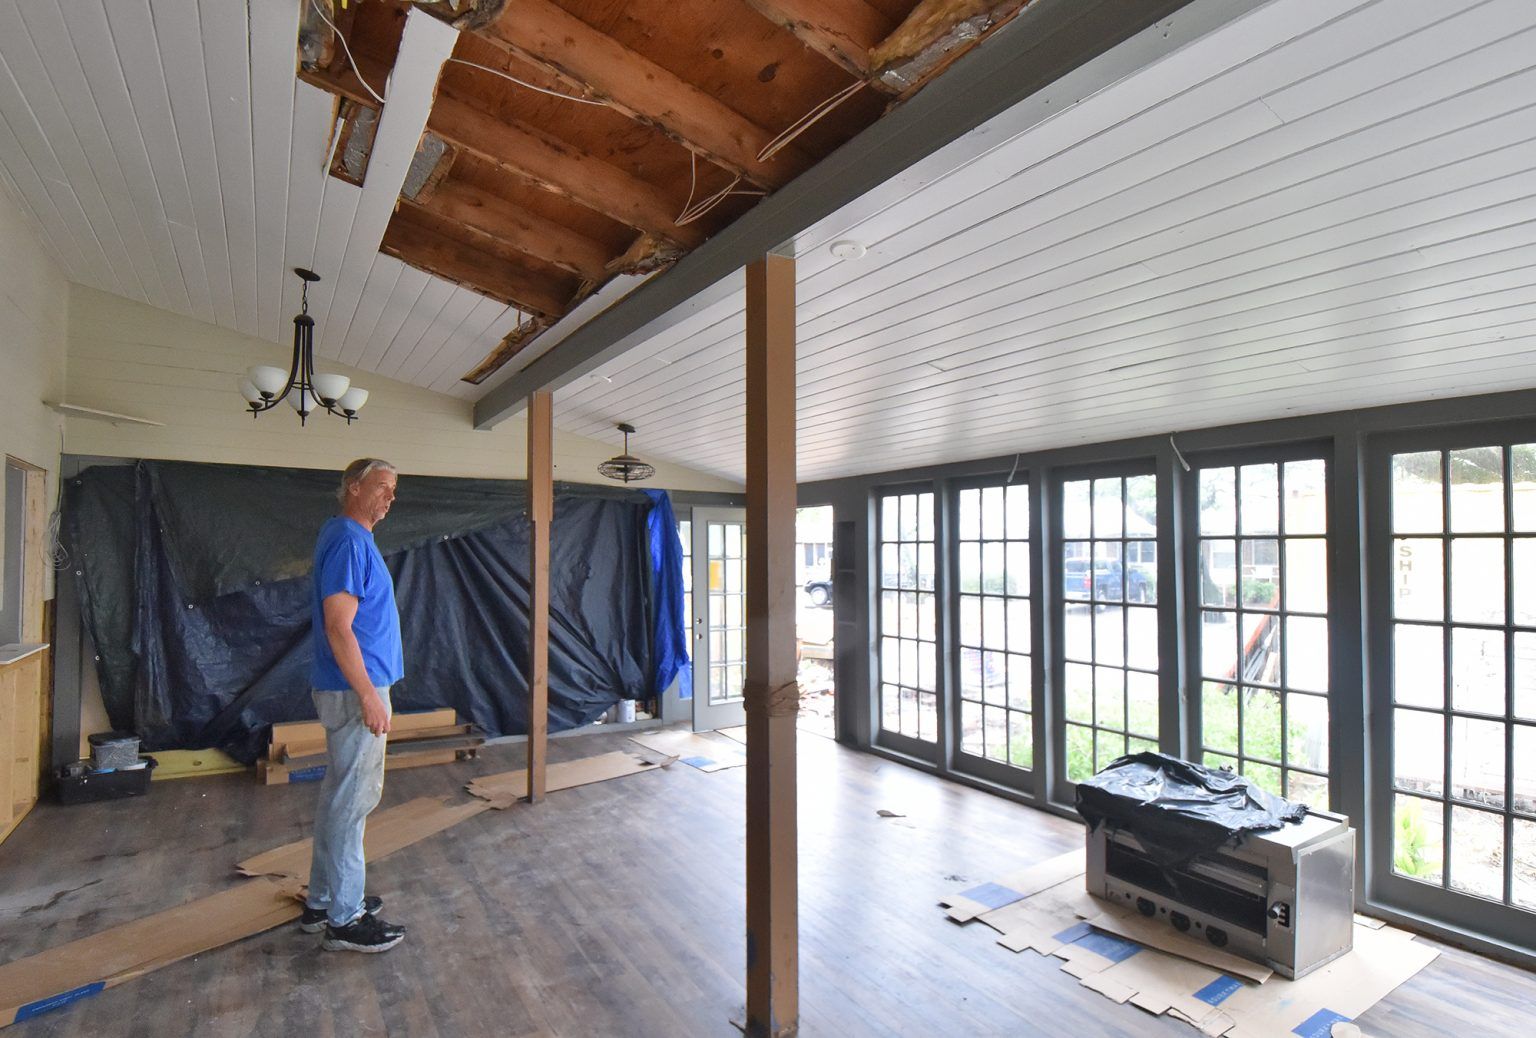 Doug Eifert, co-owner of Dajio on Ocracoke Island is shown last week in the restaurant’s main dining room, which is still under repair from damage sustained during Hurricane Dorian. Image by Dylan Ray. United States, 2020.